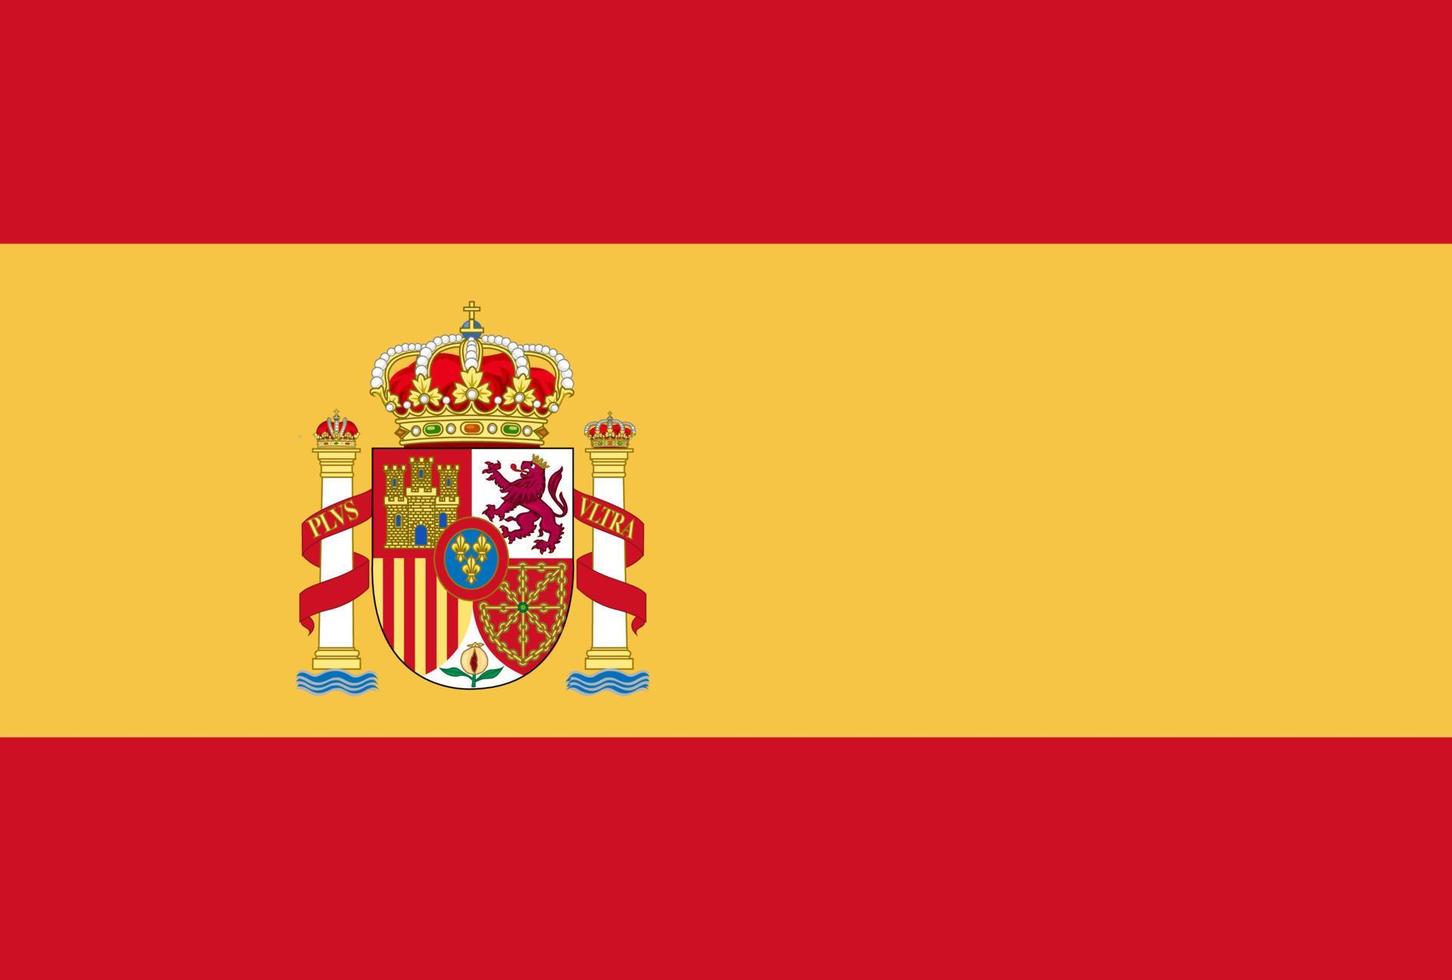 https://static.vecteezy.com/system/resources/previews/008/070/285/non_2x/spain-flag-icon-in-official-color-and-proportion-correctly-free-vector.jpg